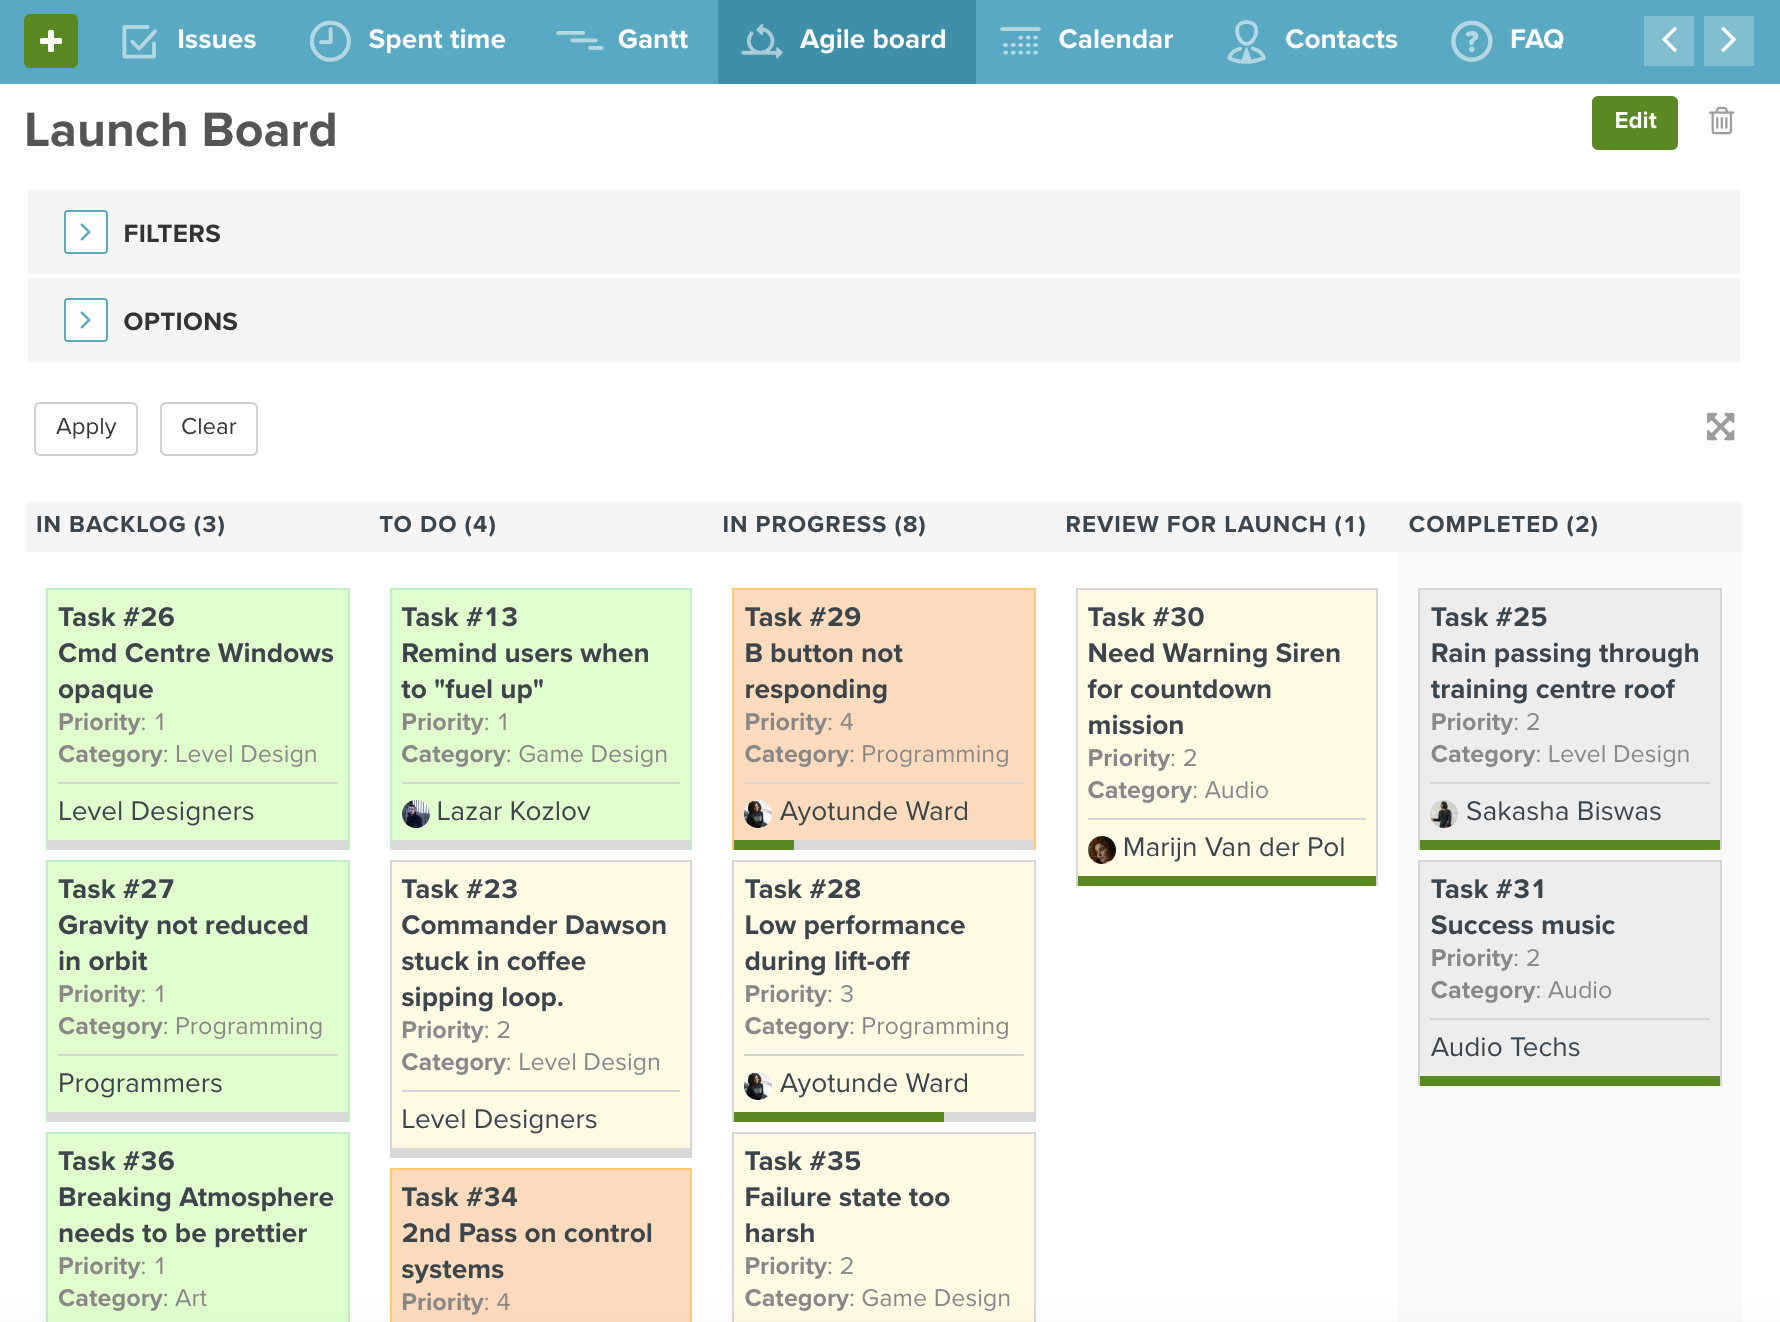 Screenshot of the Agile board in Planio colored by priority